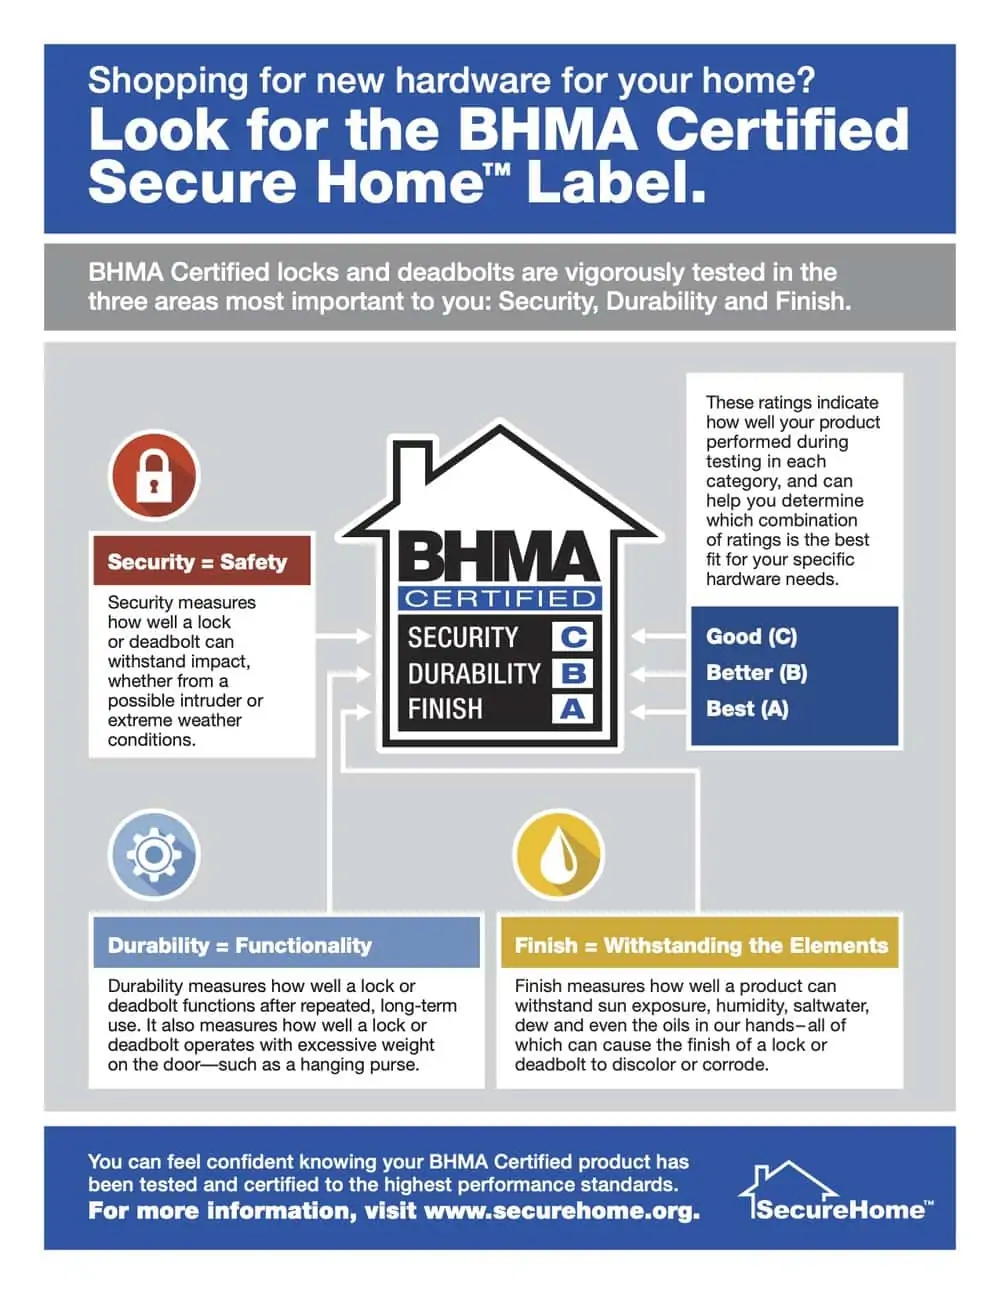 Look for the label BHMA Infographic